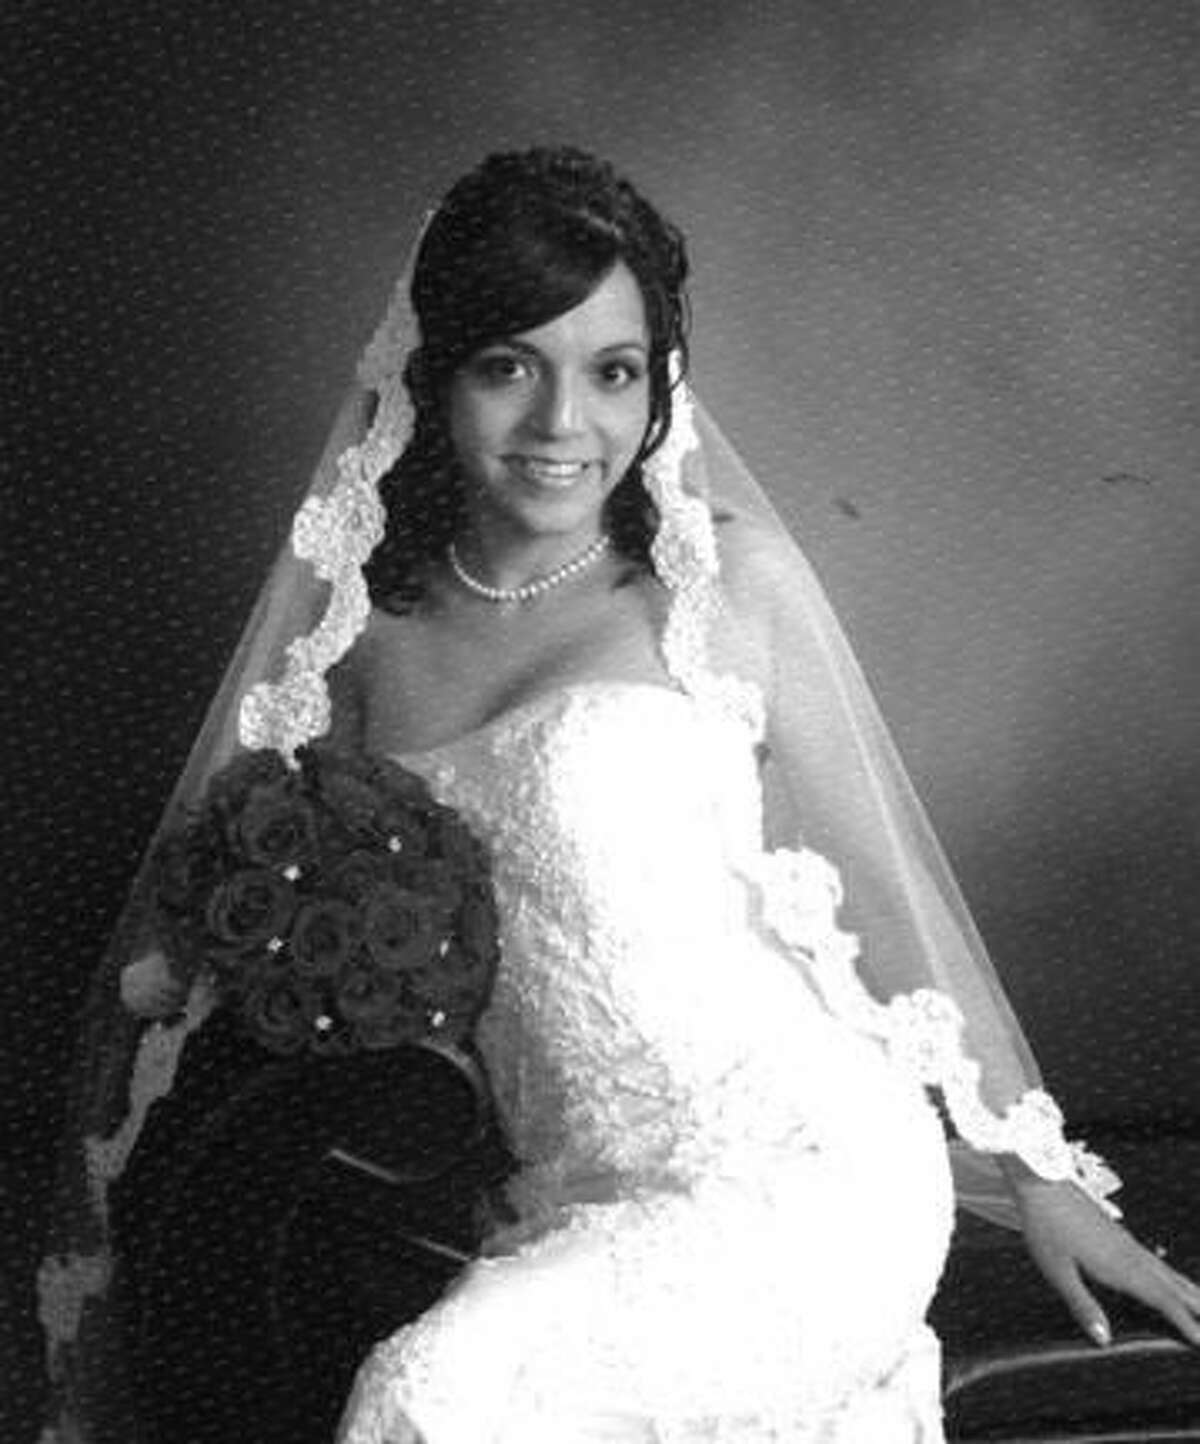 MRS. LUCIANO ADRIAN RODRIGUEZ